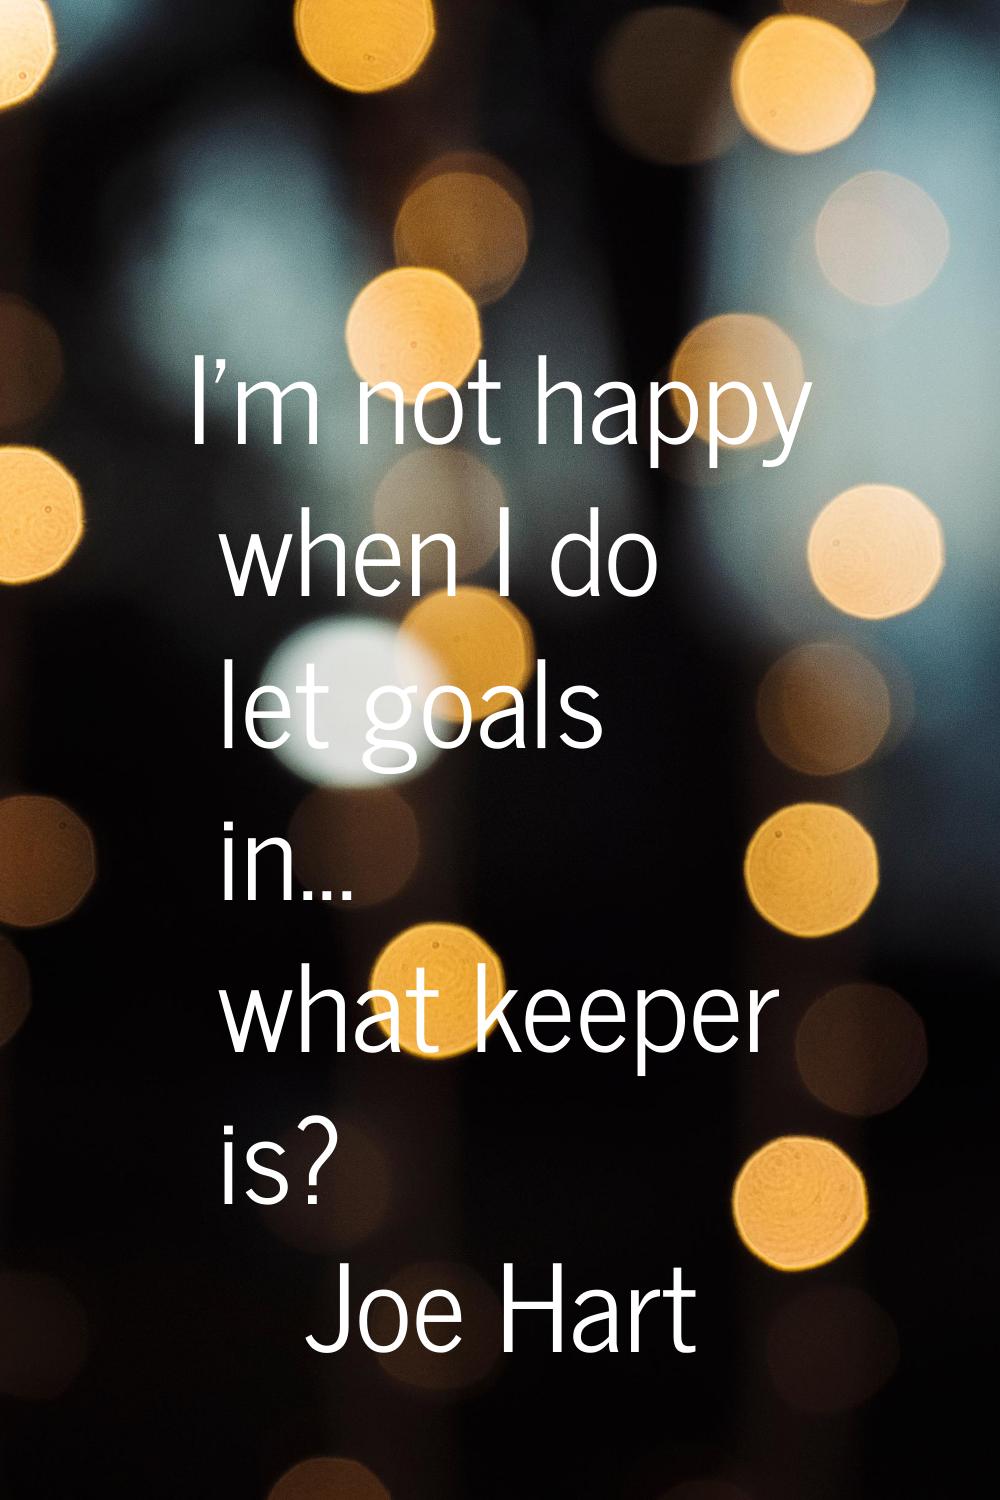 I'm not happy when I do let goals in... what keeper is?